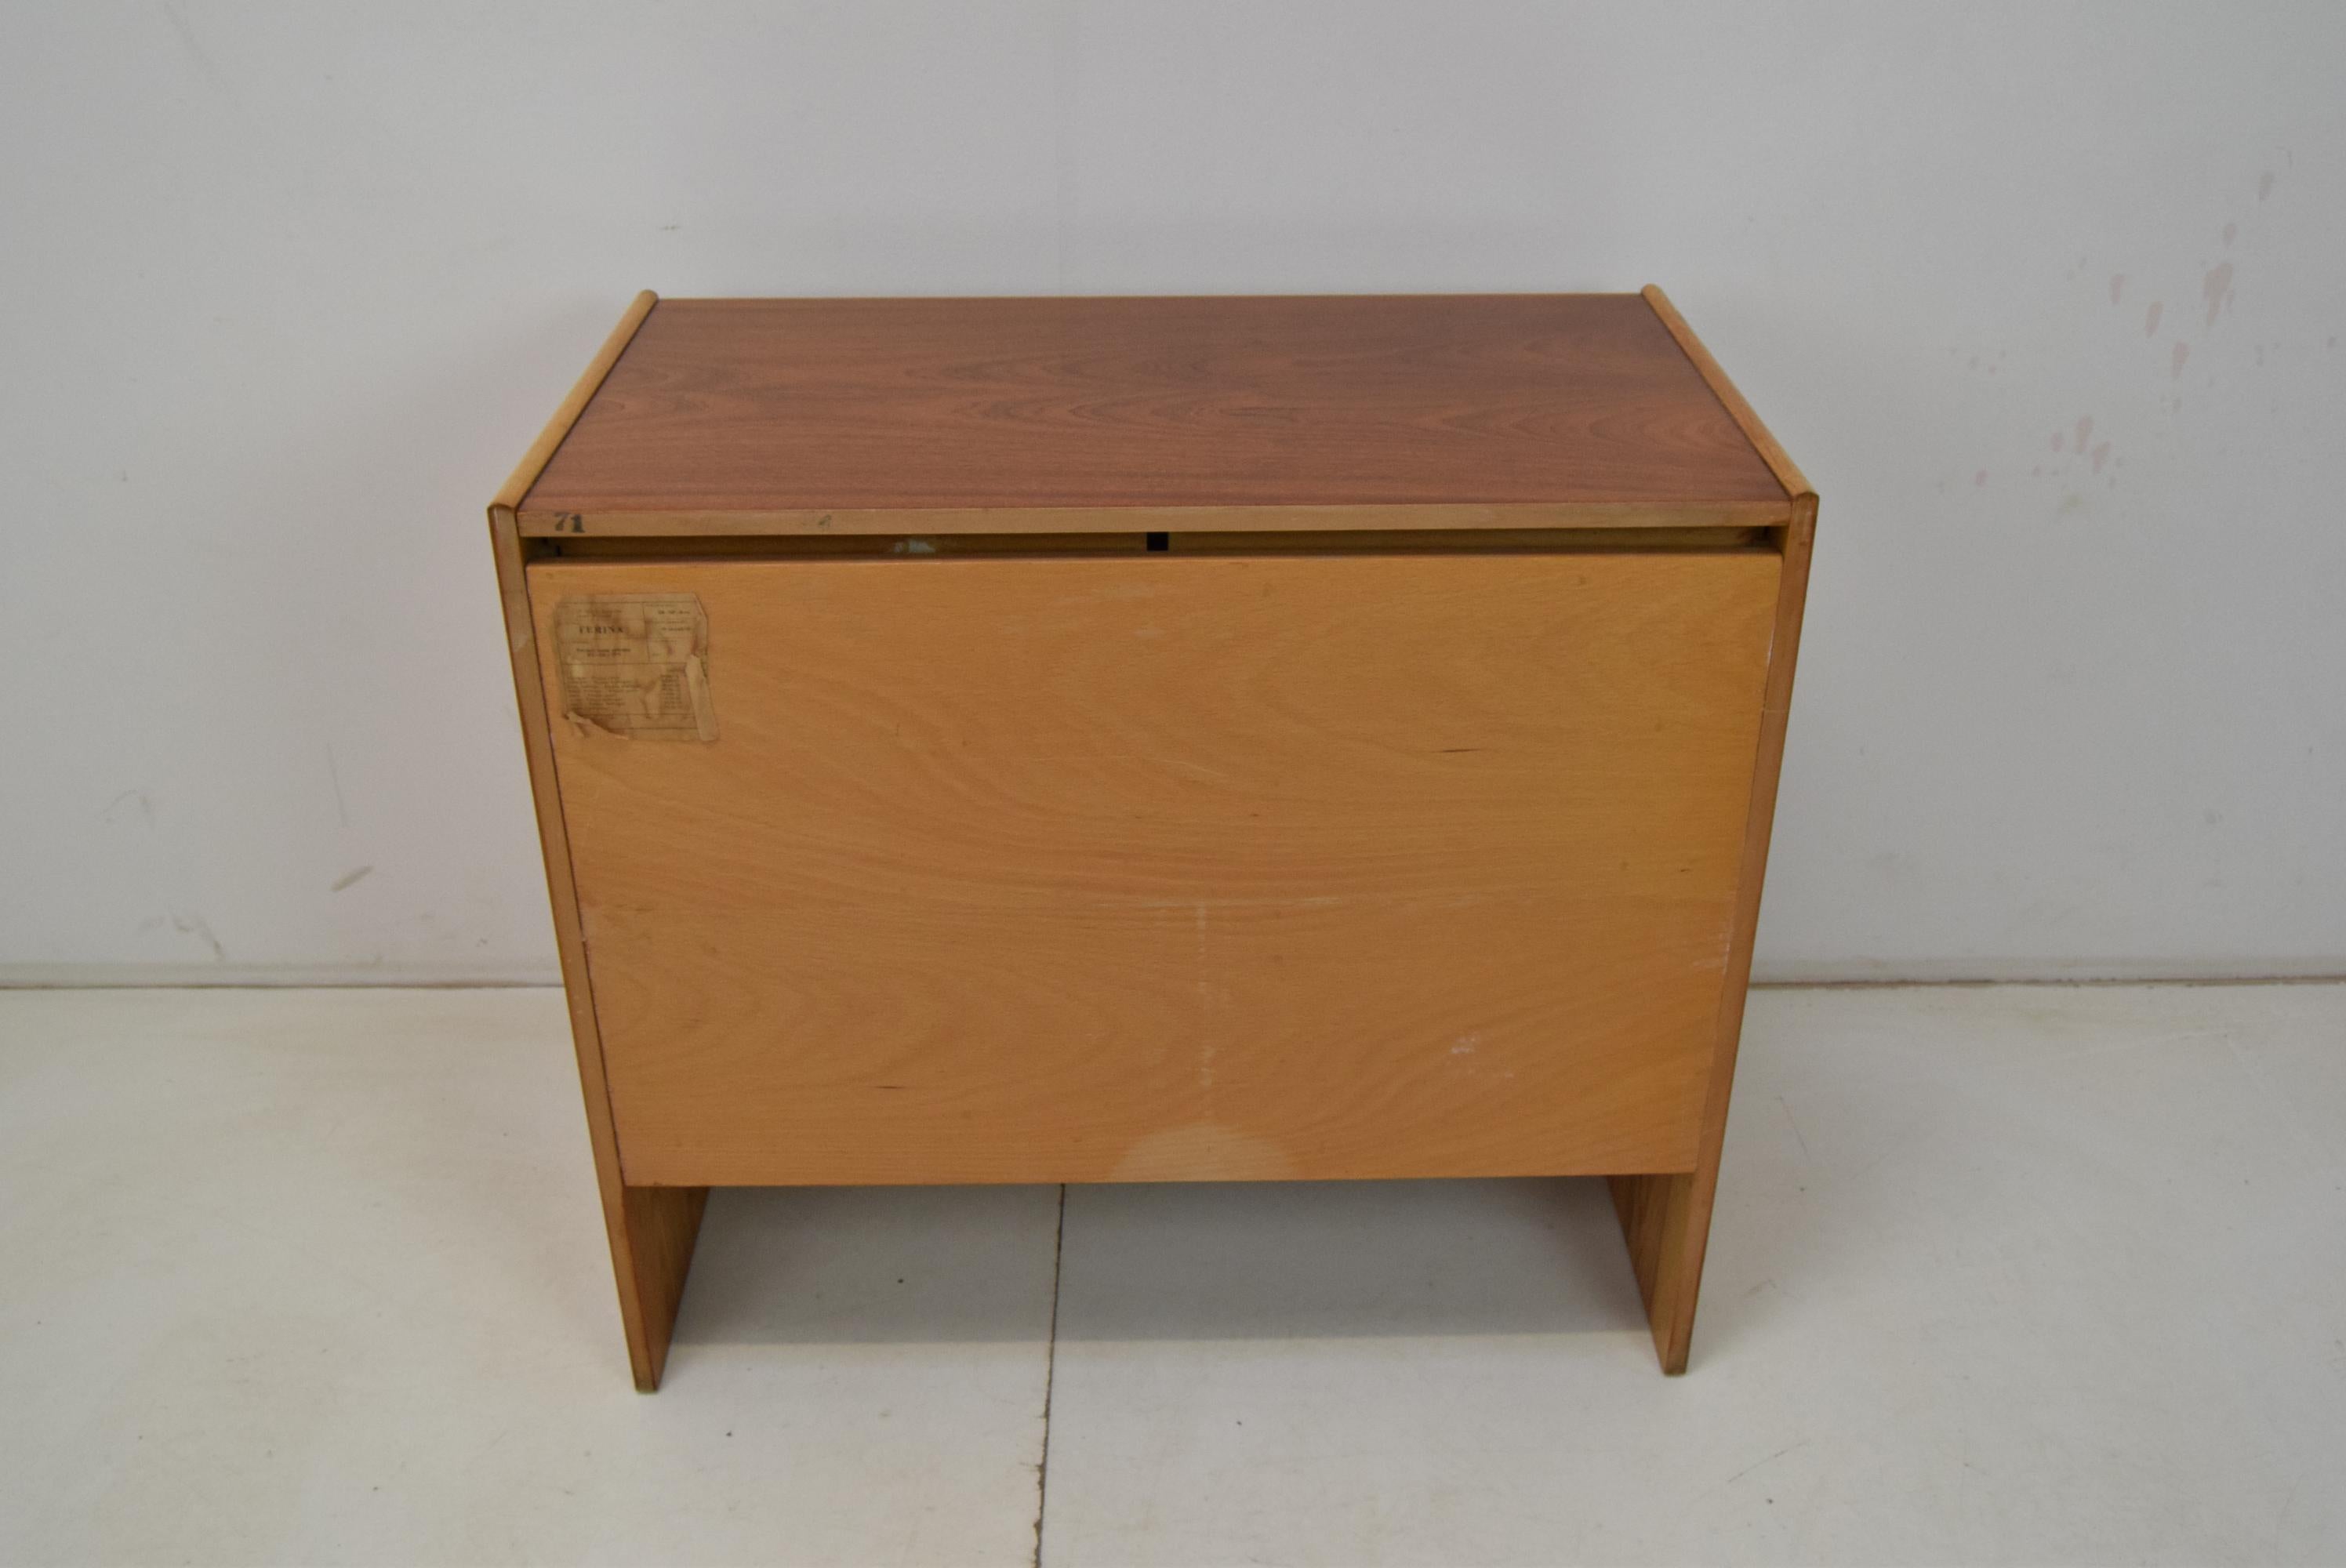 Lady's Desk or Vanity or Side Table in Mahogany / Up Zavody, 1970s For Sale 7